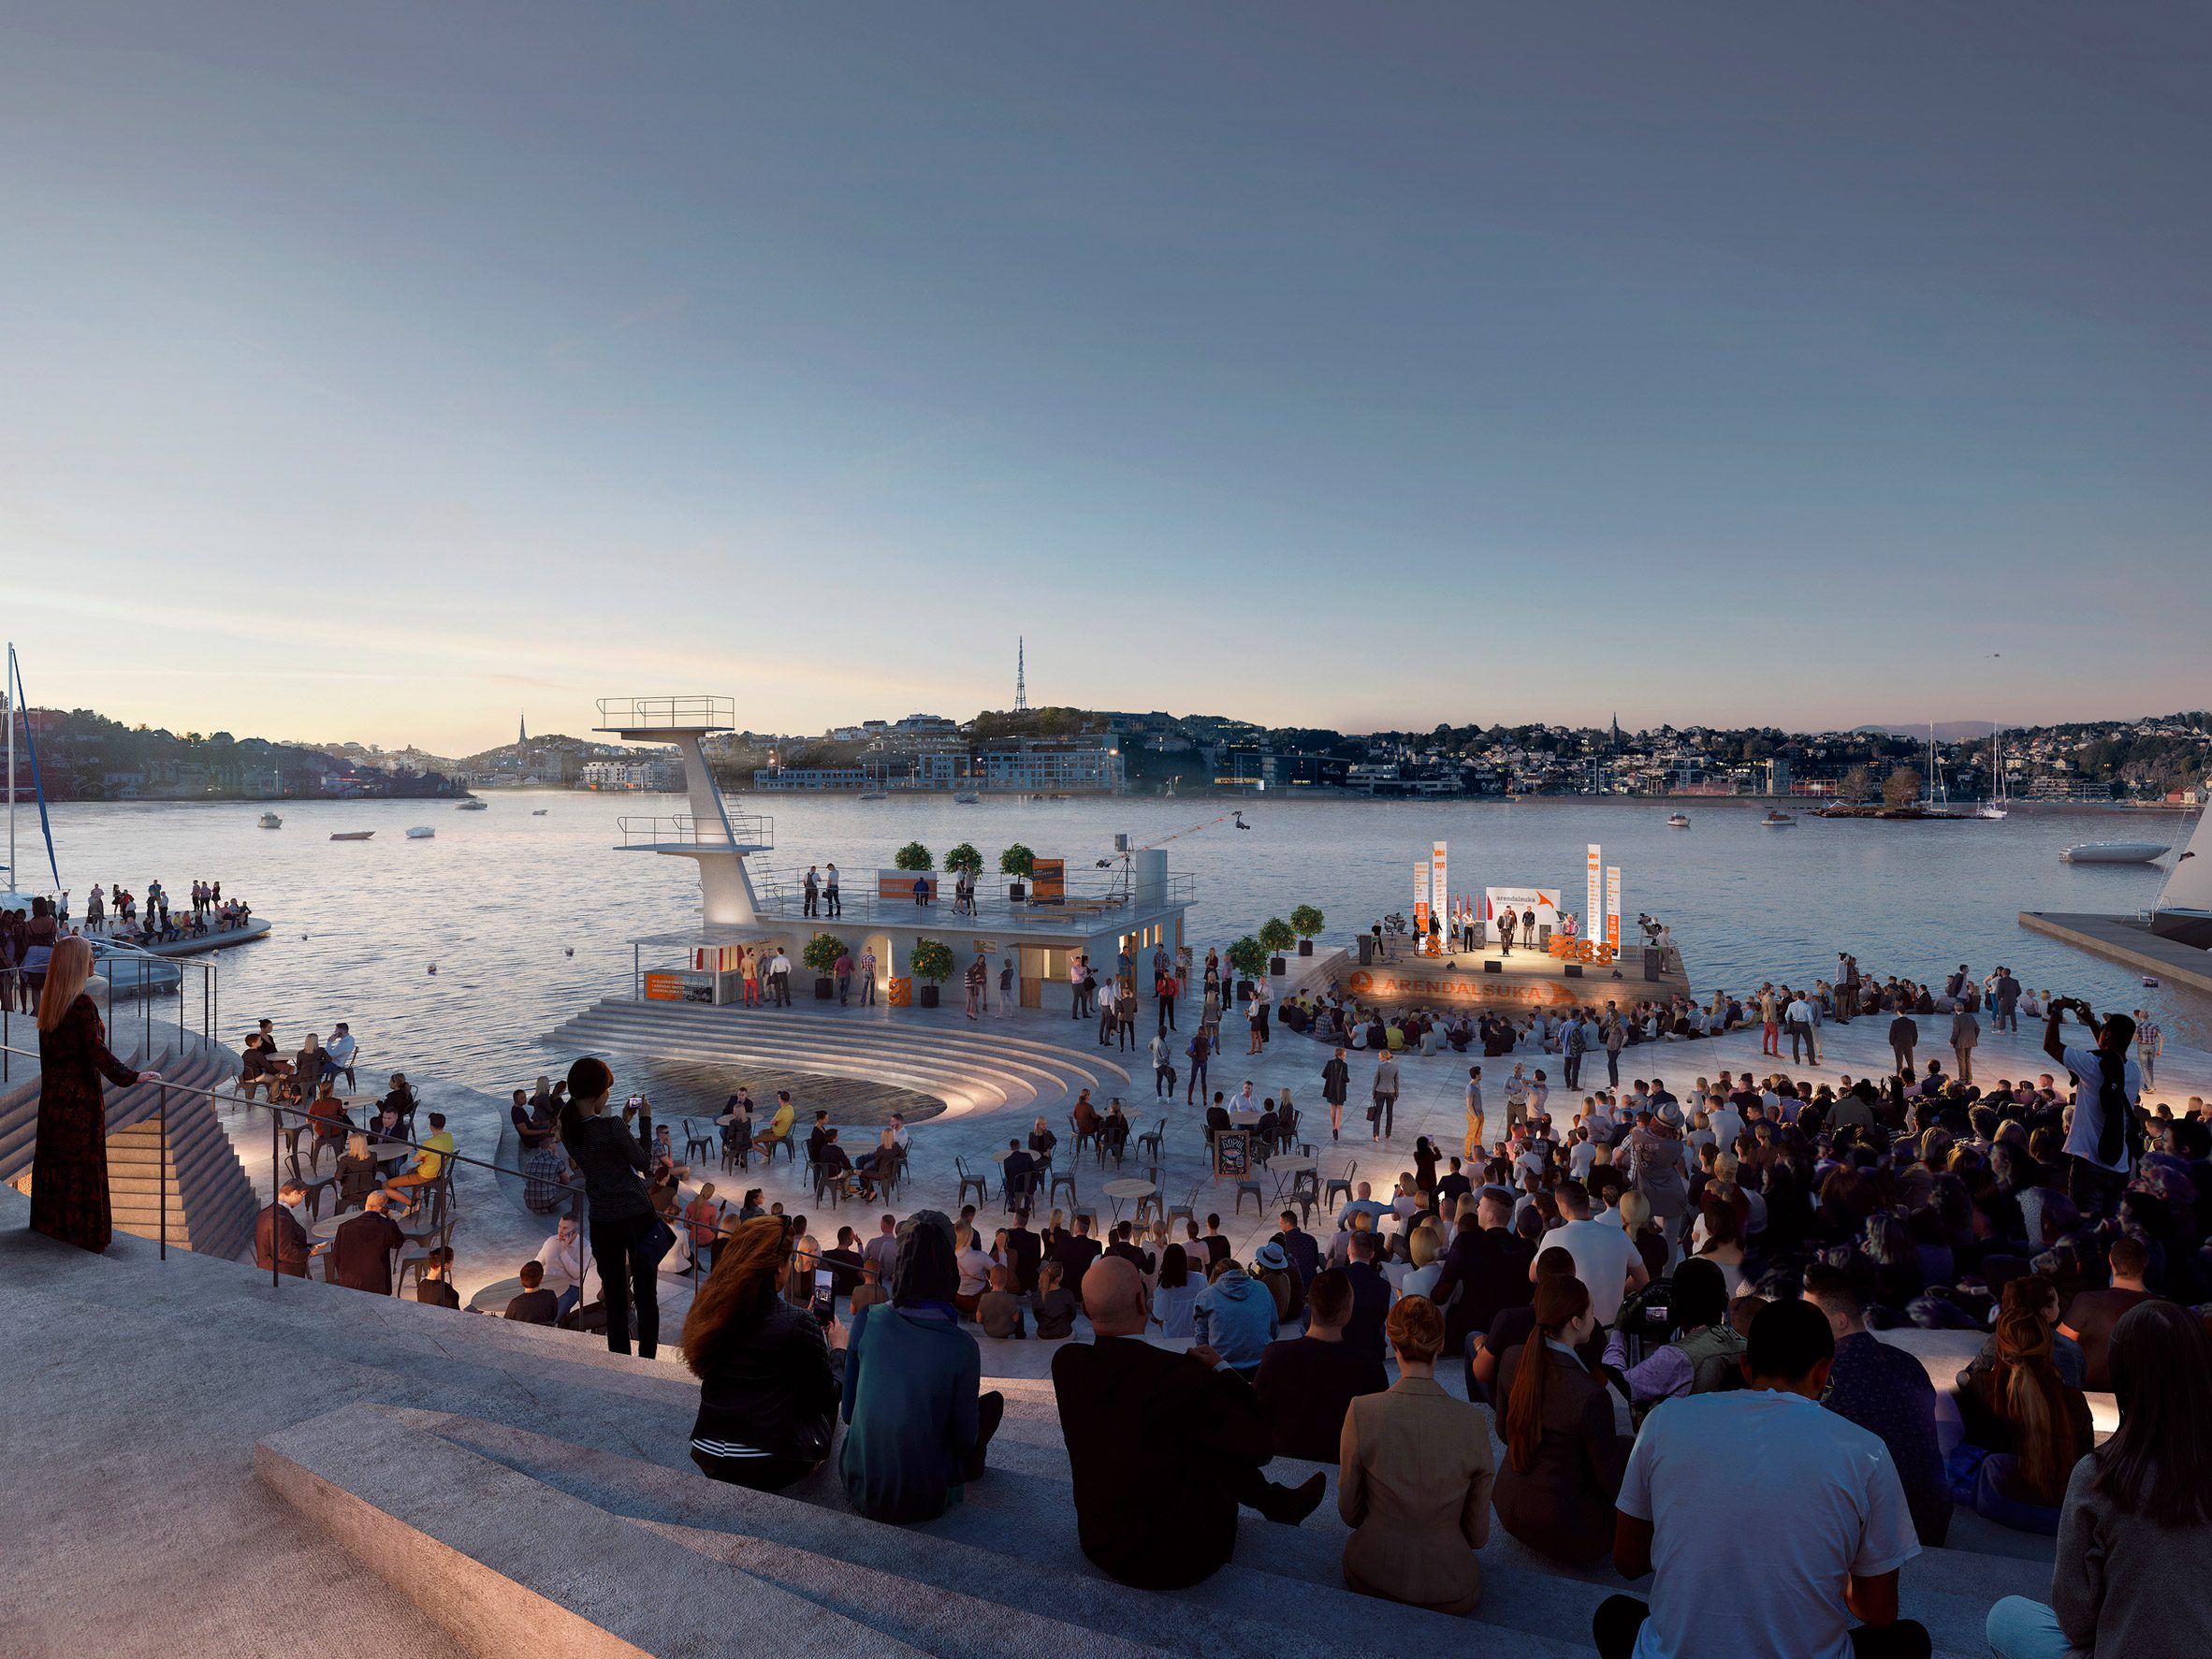 People sitting on amphitheatre seating watching an open-air performance on the harbour